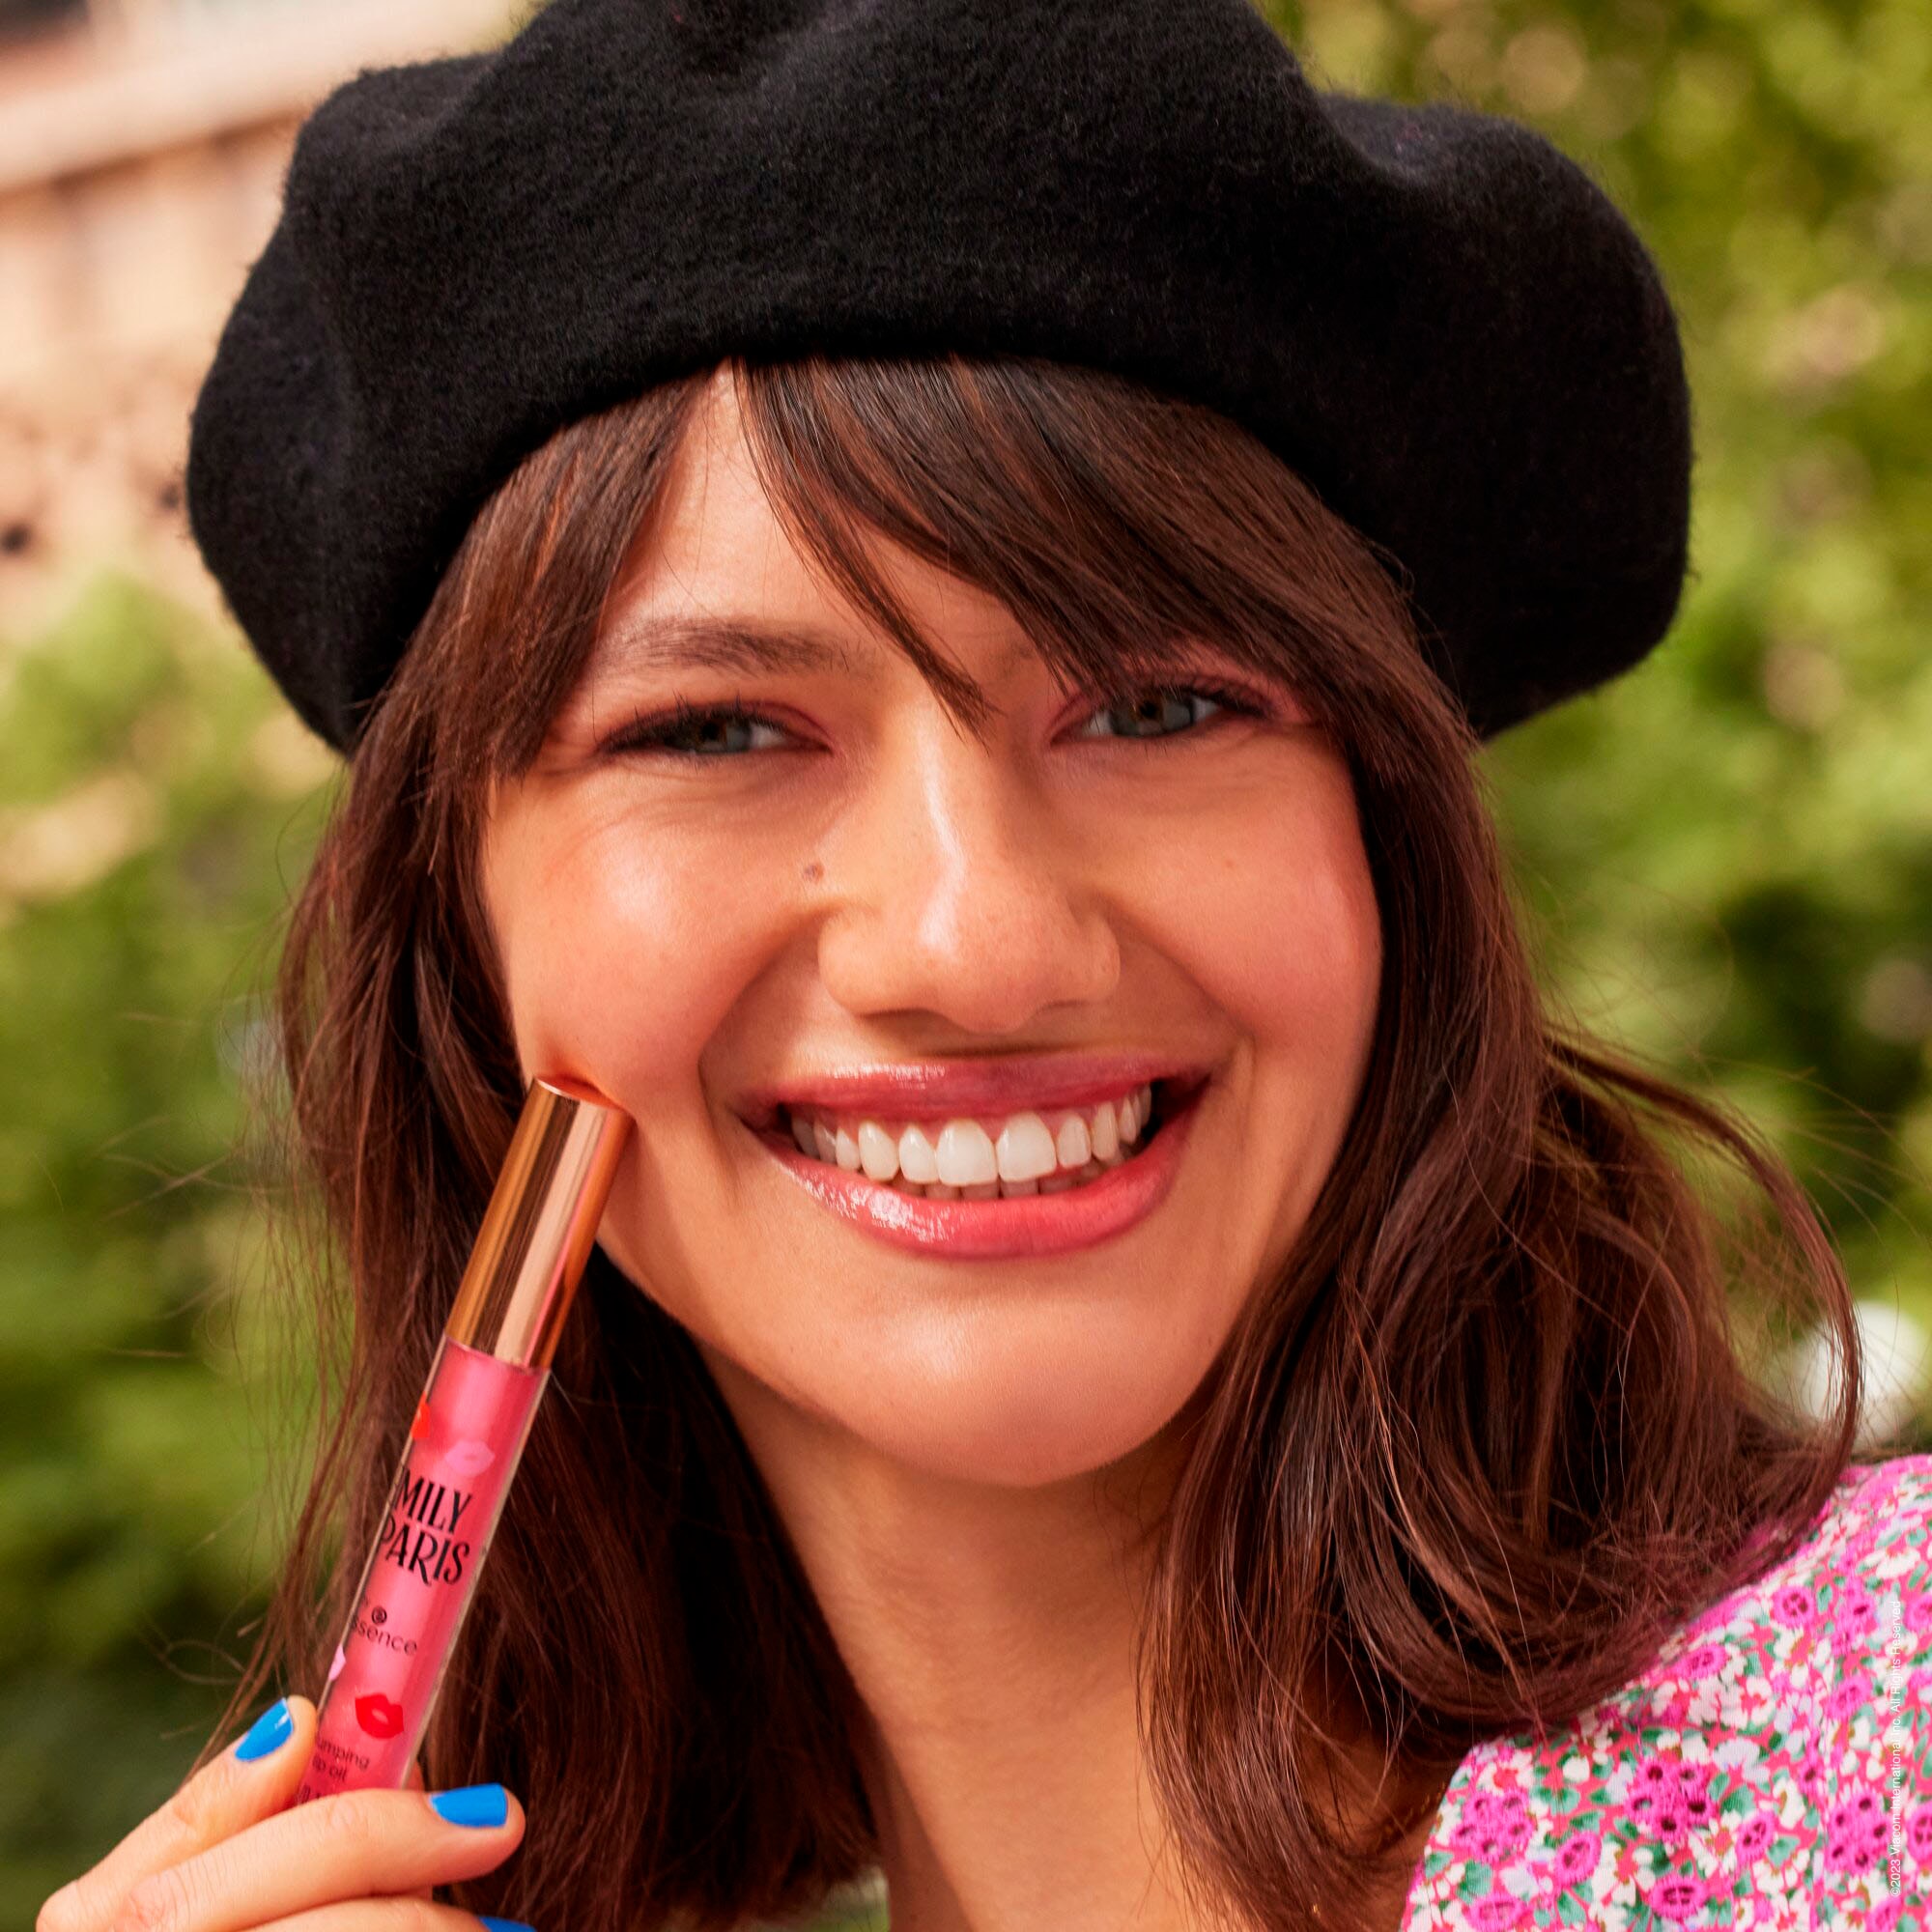 »EMILY plumping essence IN Essence online Lipgloss lip UNIVERSAL PARIS bei by oil«